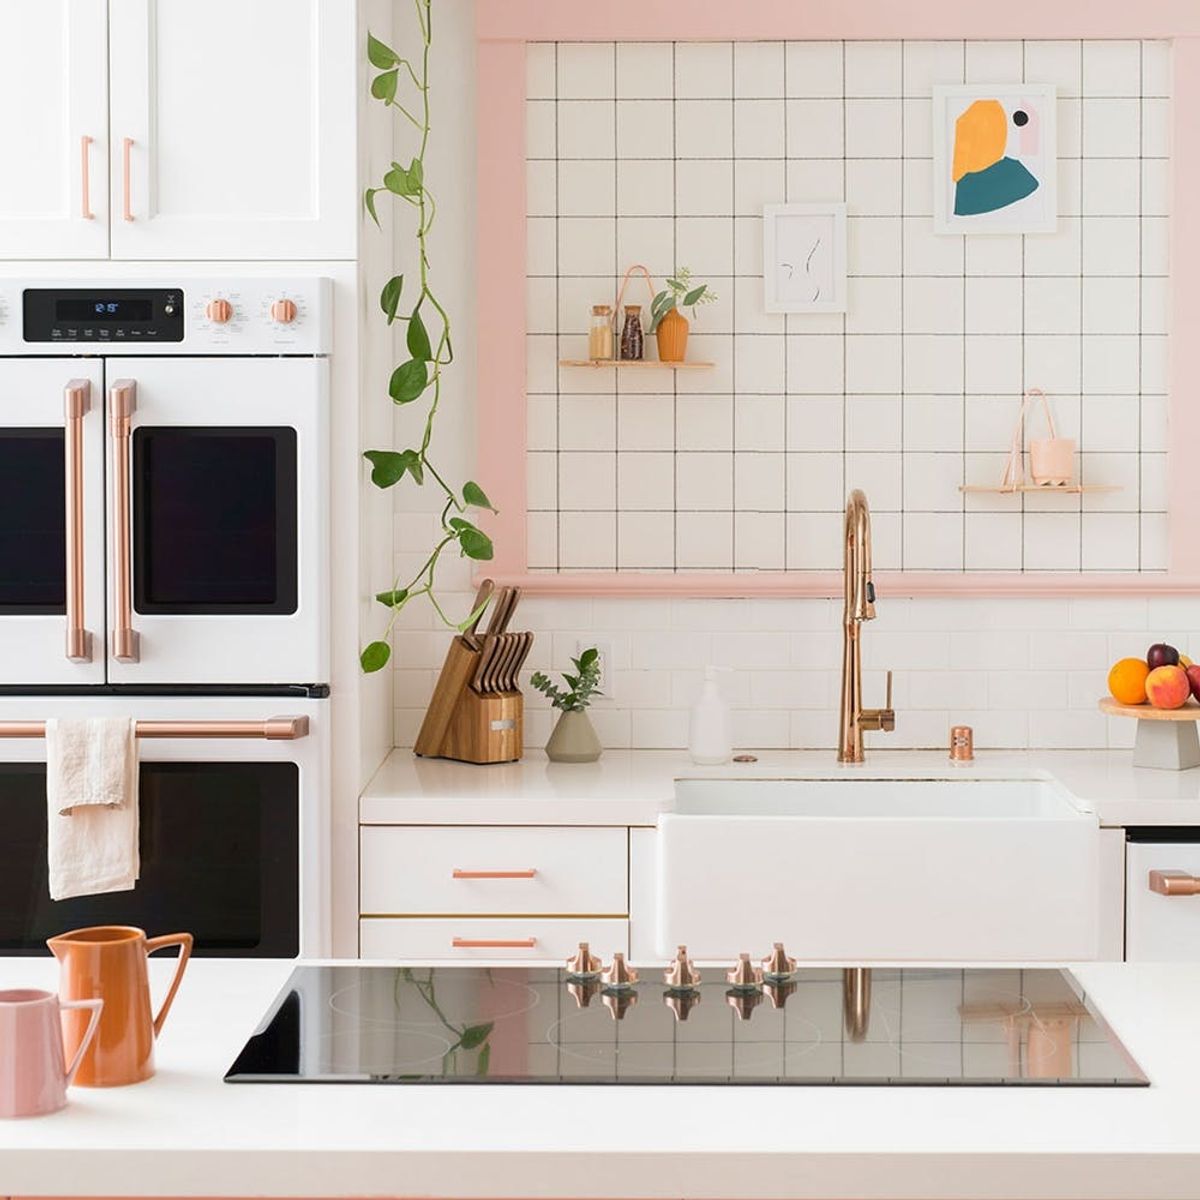 Find Your Perfect Style of Kitchen